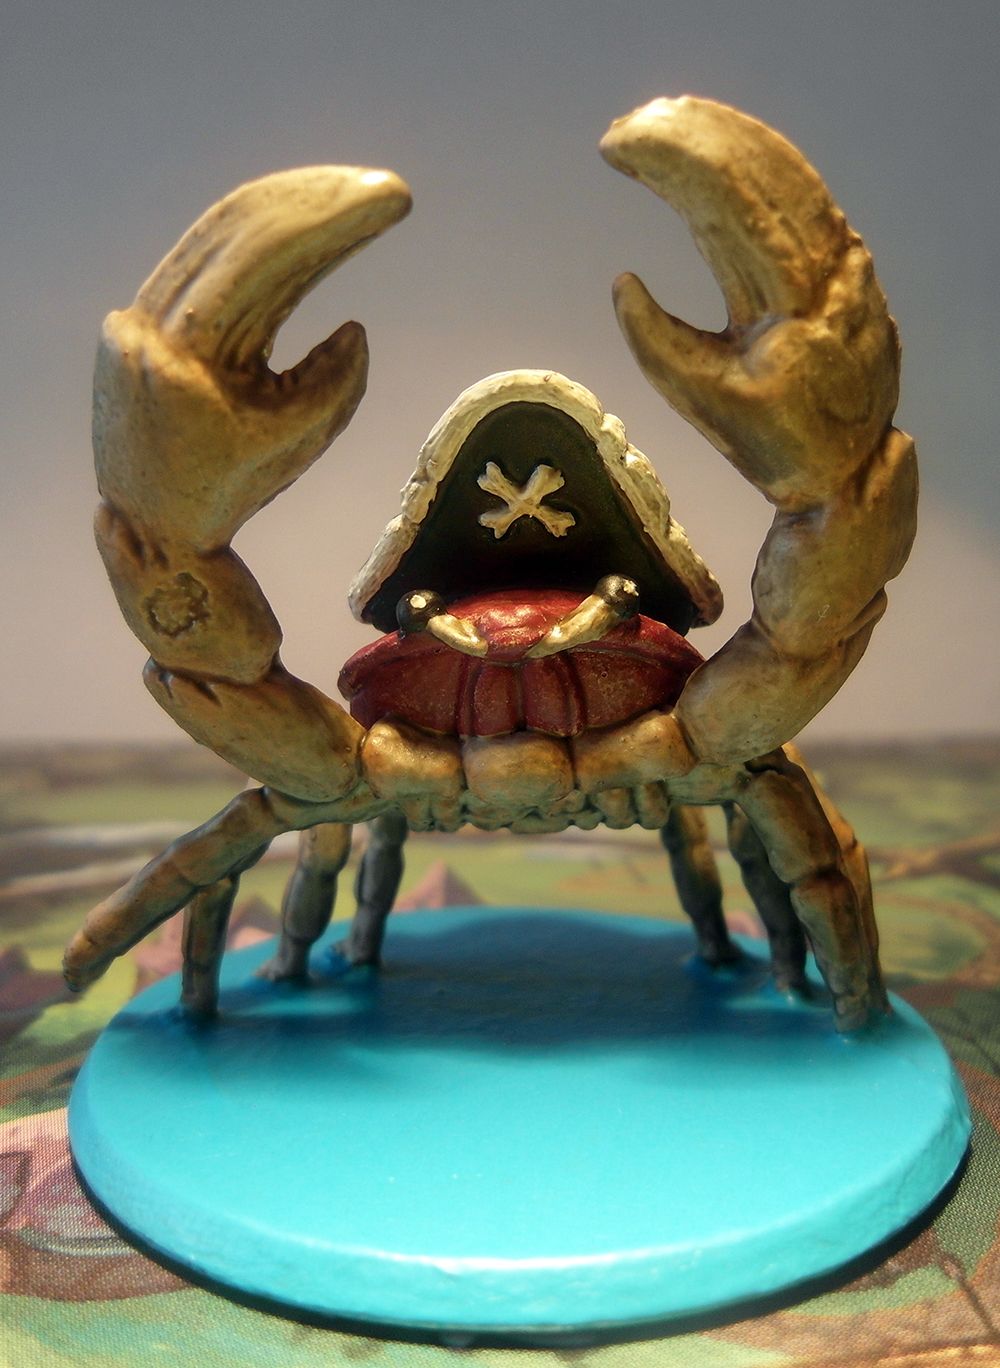 12 Realms: The Crab